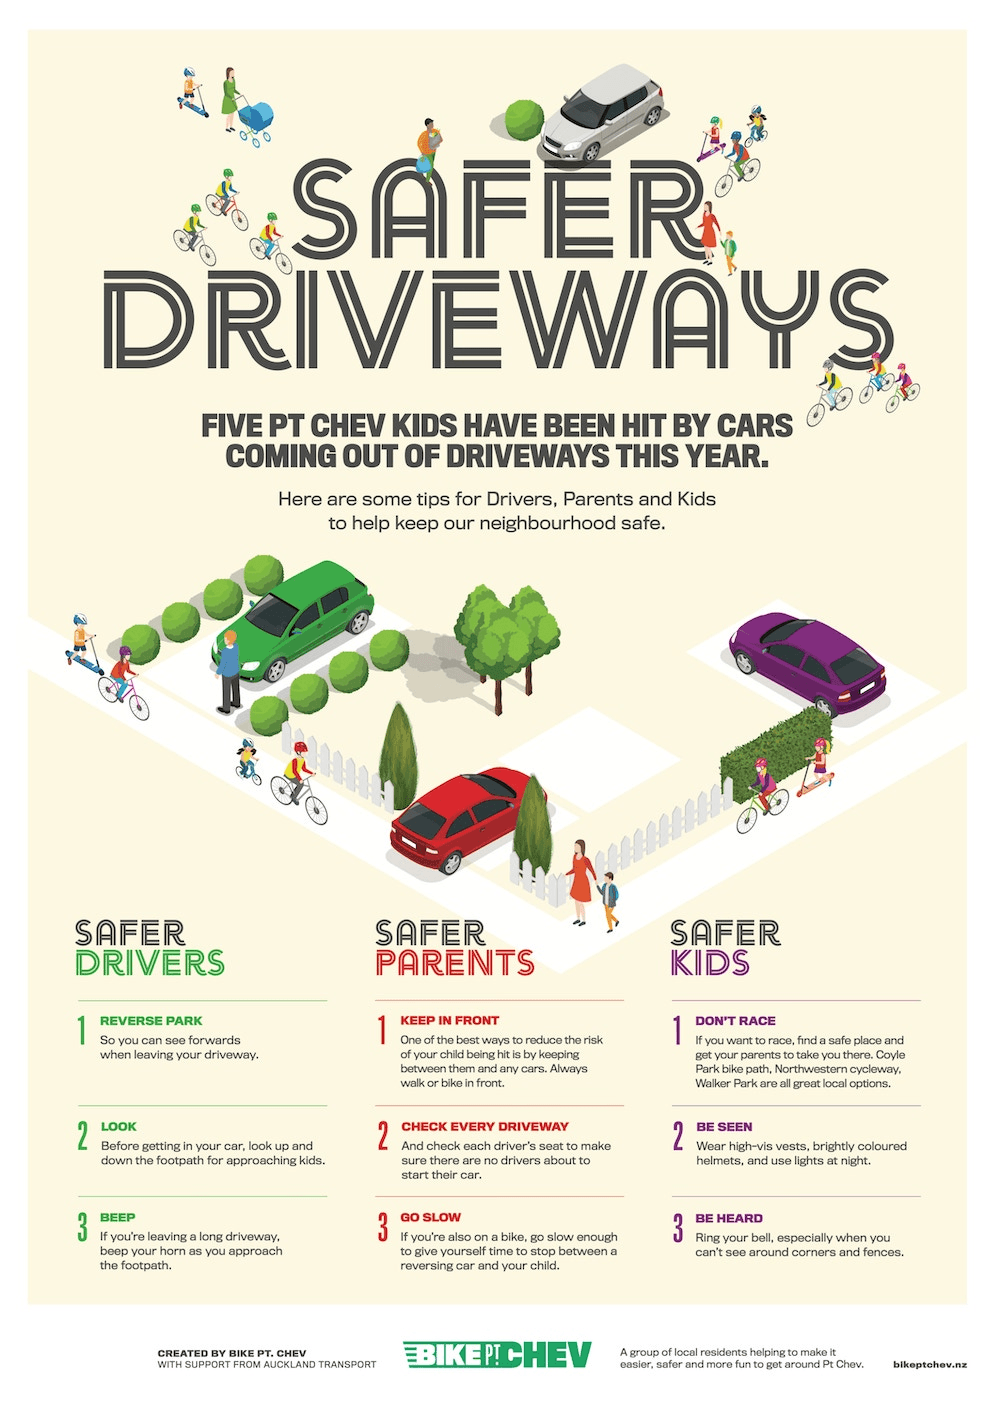 A Bike Point Chevalier graphic about driveways from 2019.